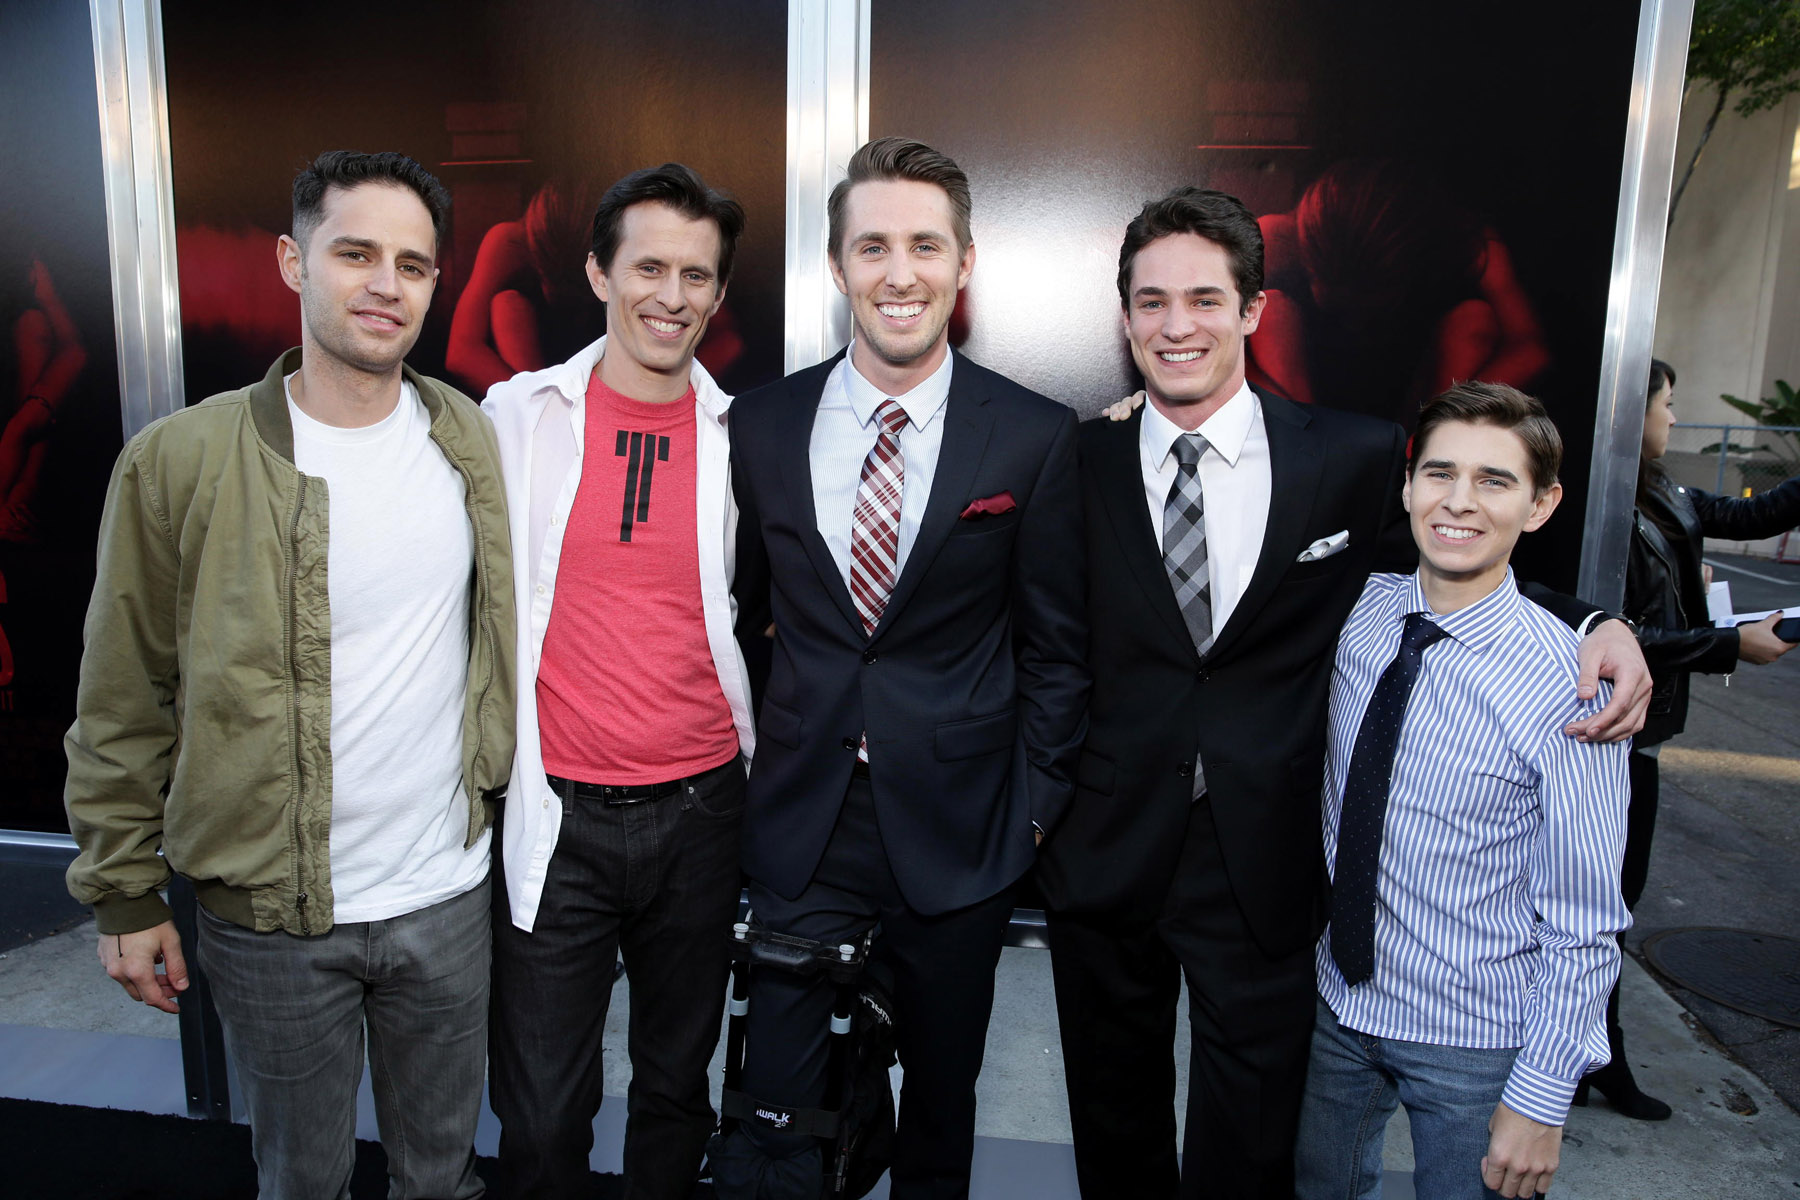 From Left, Dean Schnider, Travis Cluff, Ryan Shoos, Reese Mishler and Chris Lofing at The Gallows Hollywood Premiere